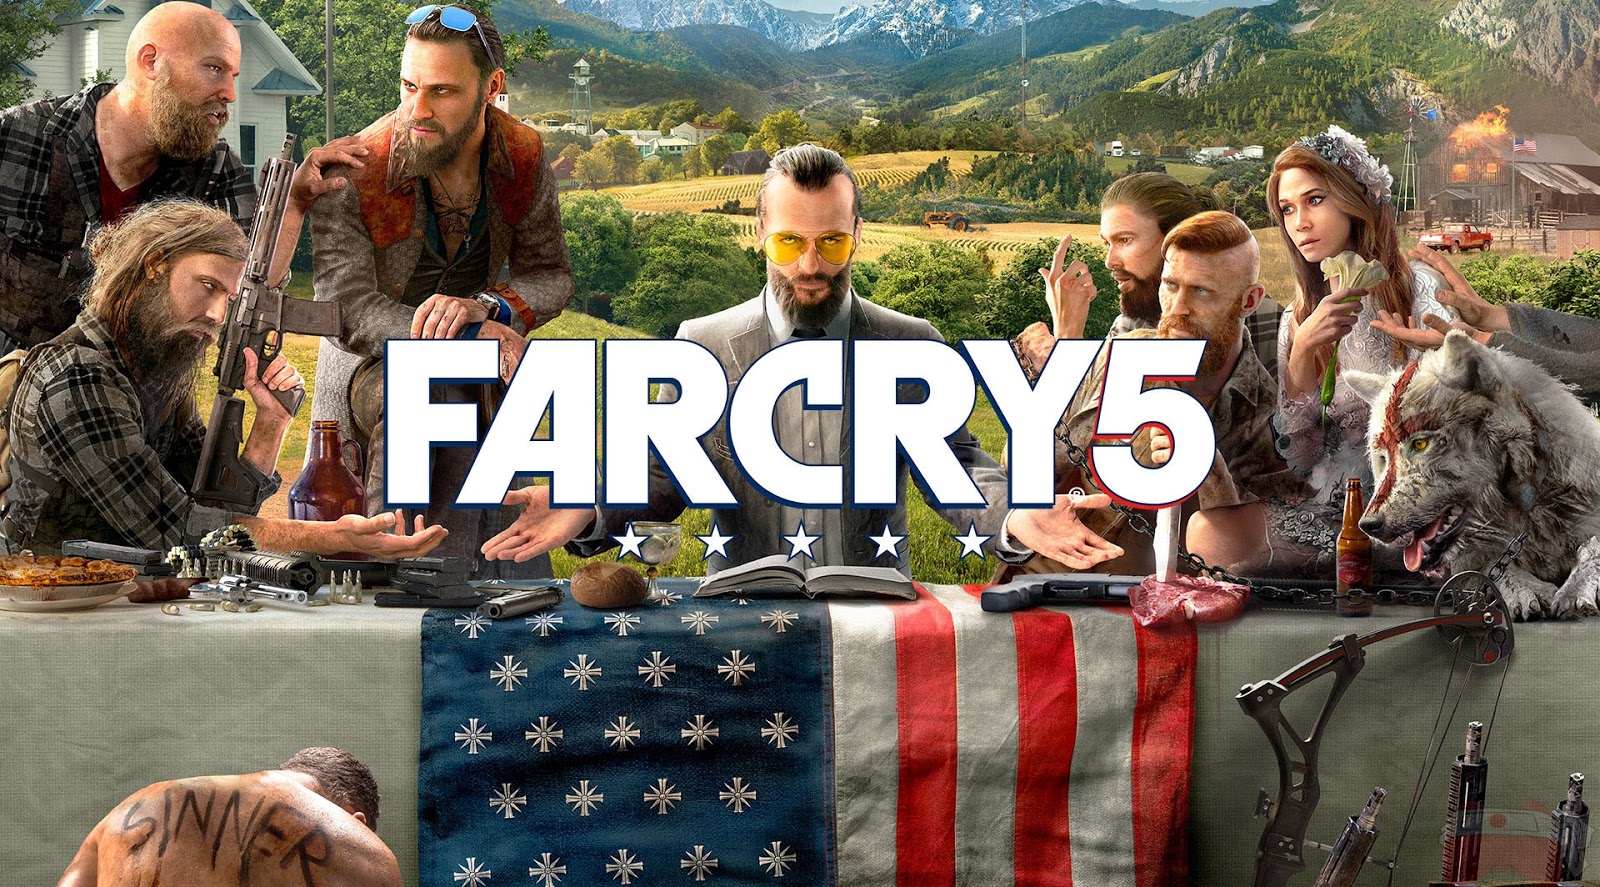 What are the Far Cry 5 DLCS?